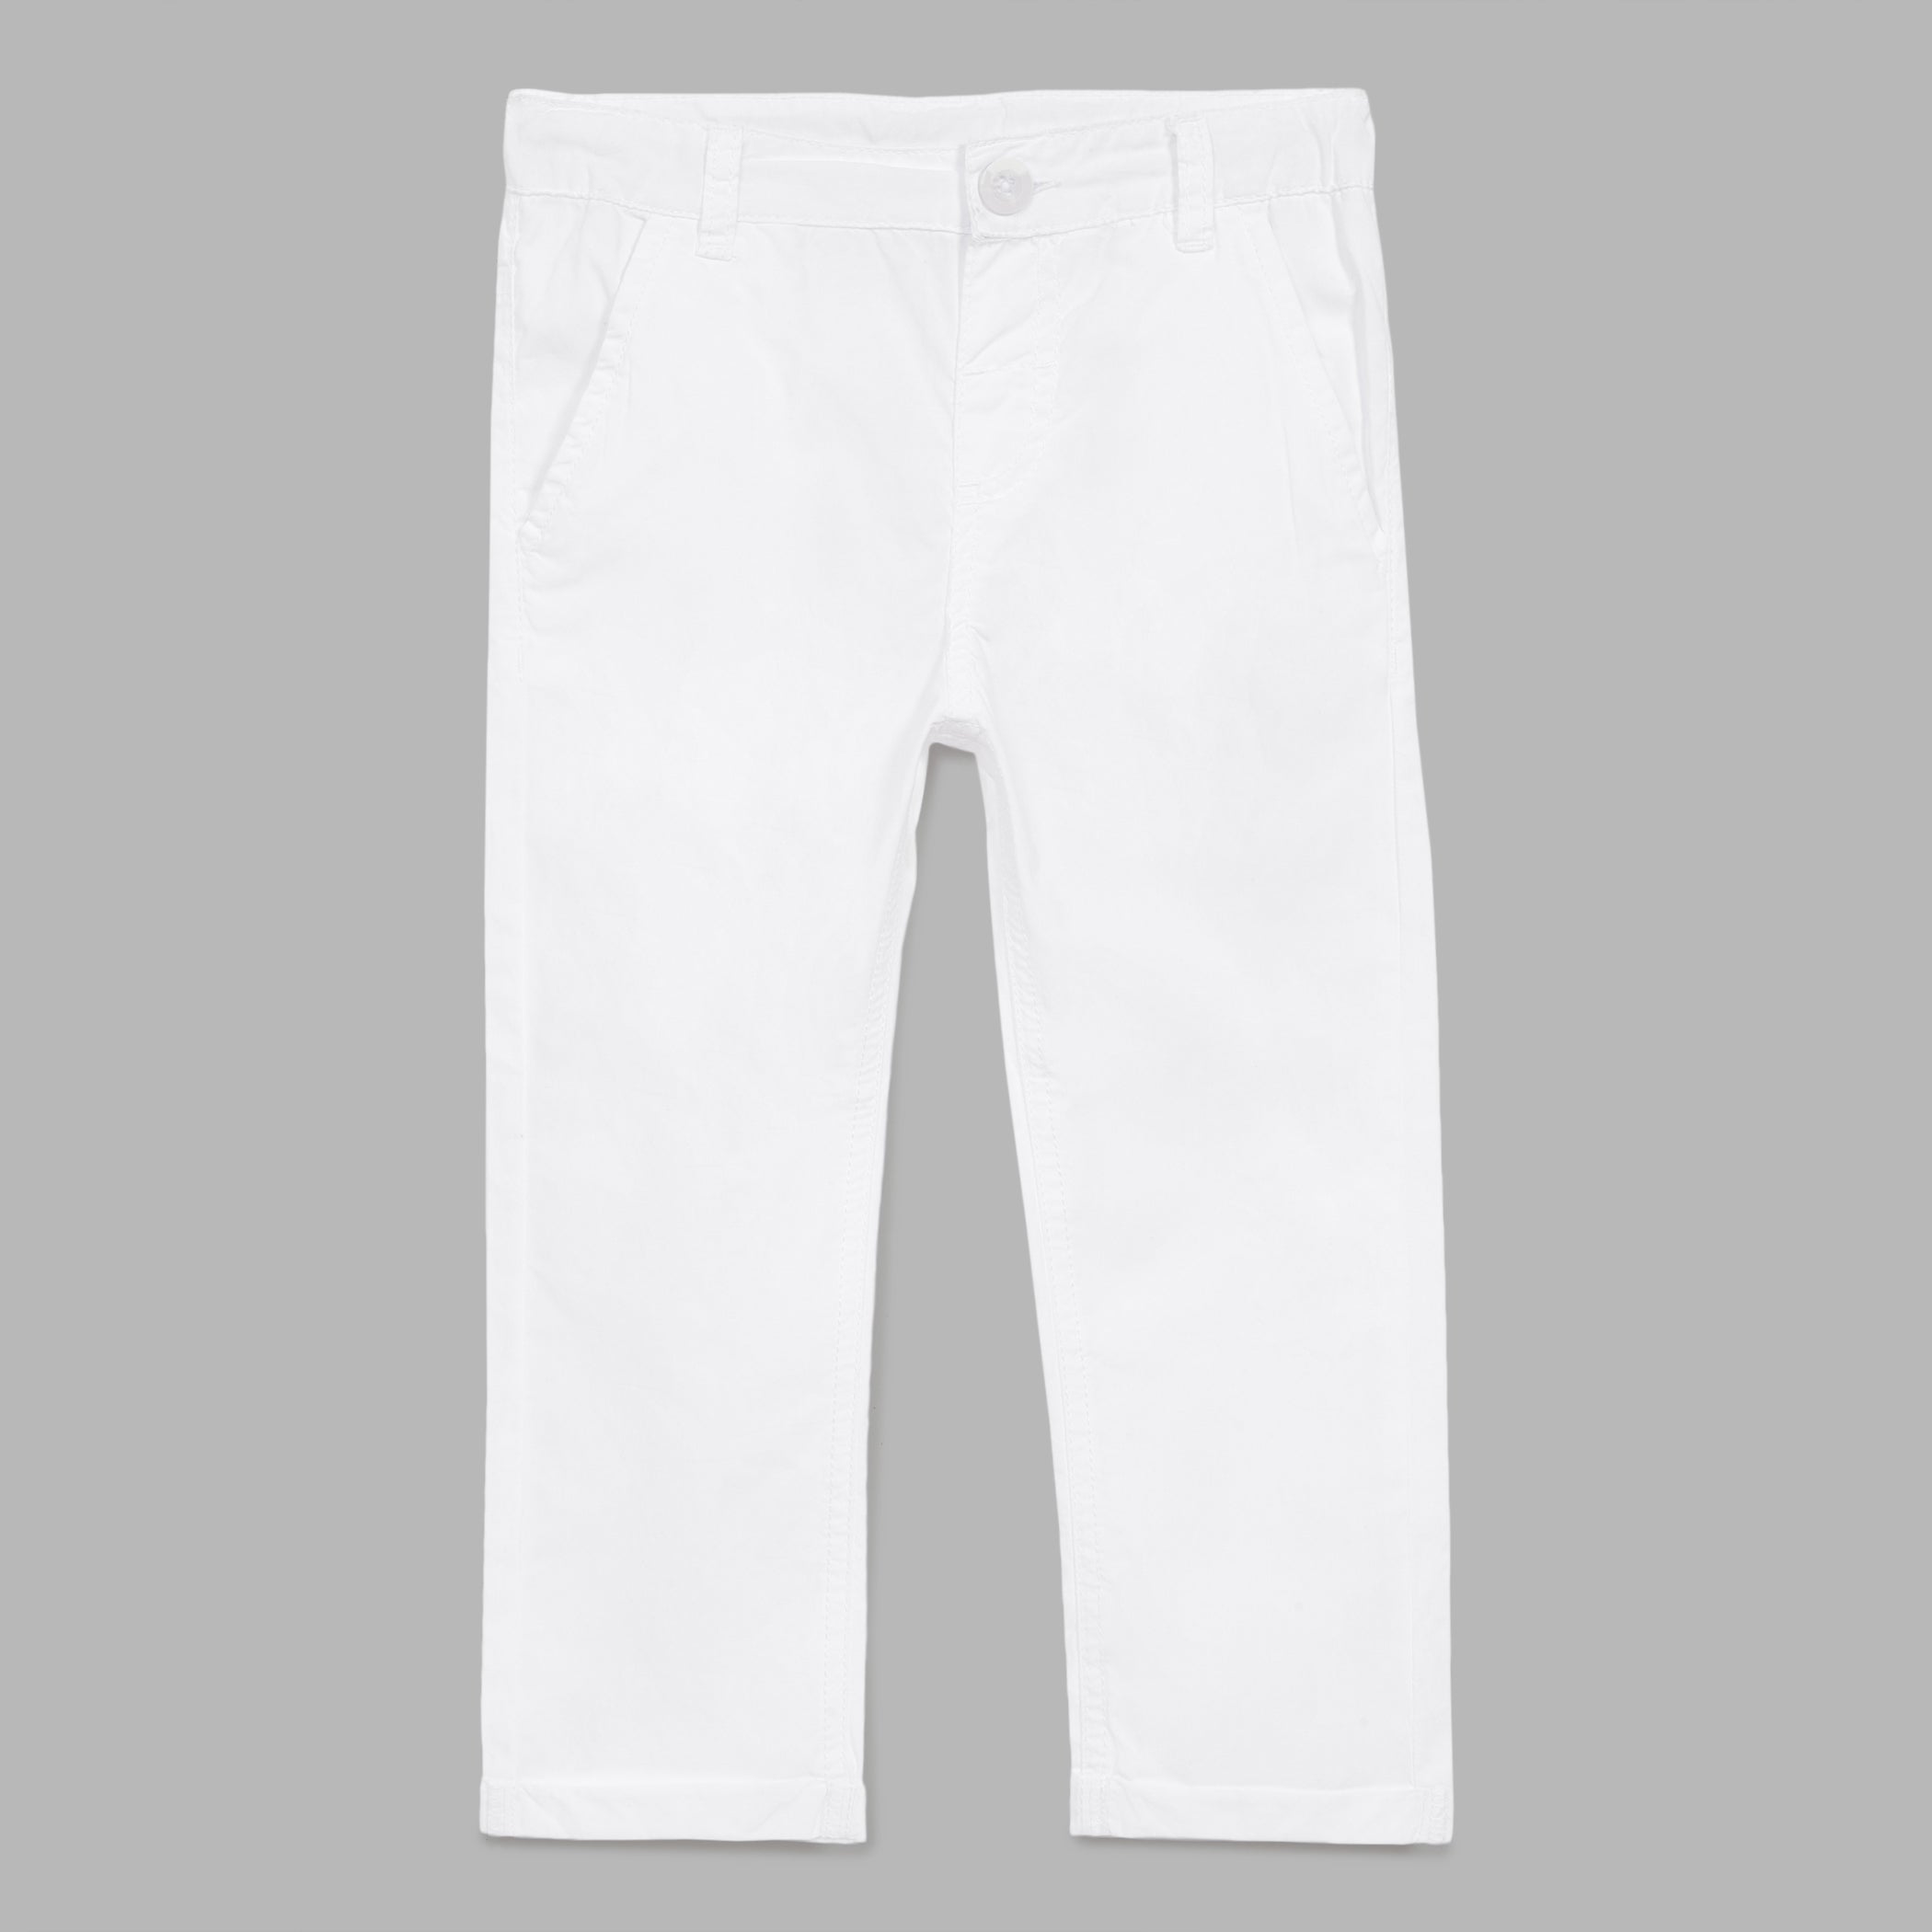 Boys Clothing | It's Formal Pant For Boy | Freeup